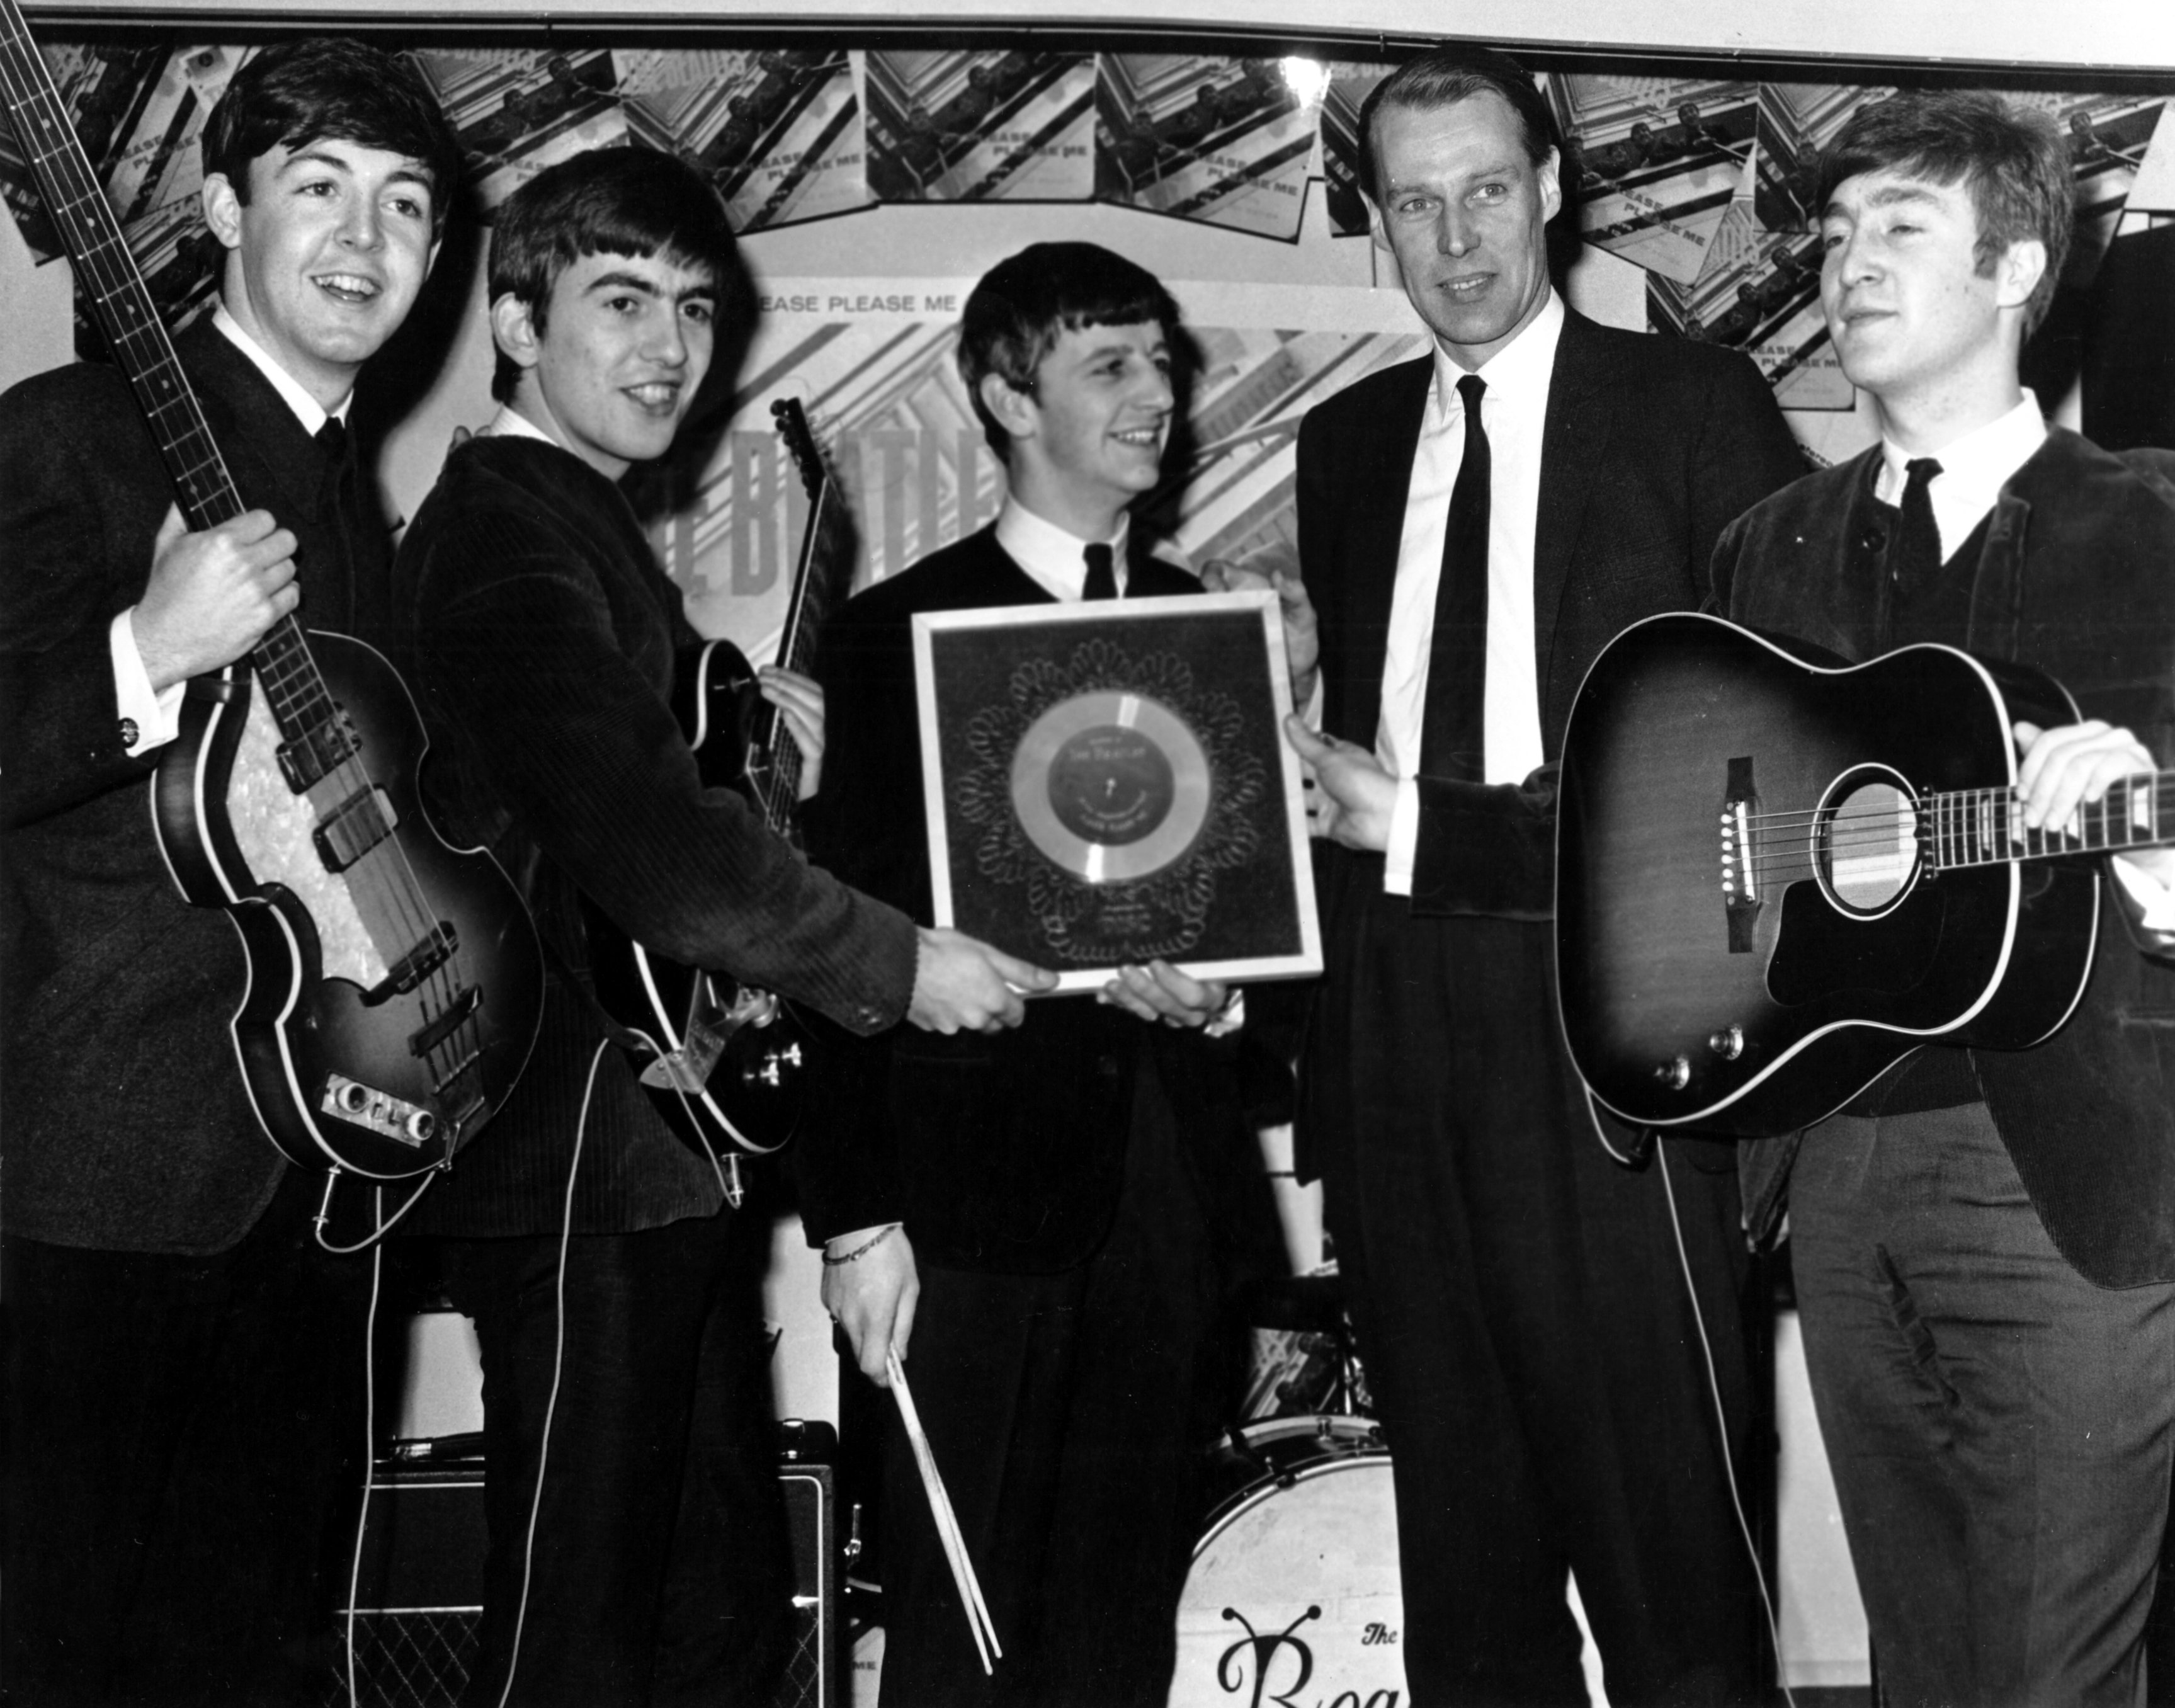 The Beatles pose with their record producer George Martin in 1964, left to right: Paul McCartney, George Harrison, Ringo Starr, Martin, and John Lennon